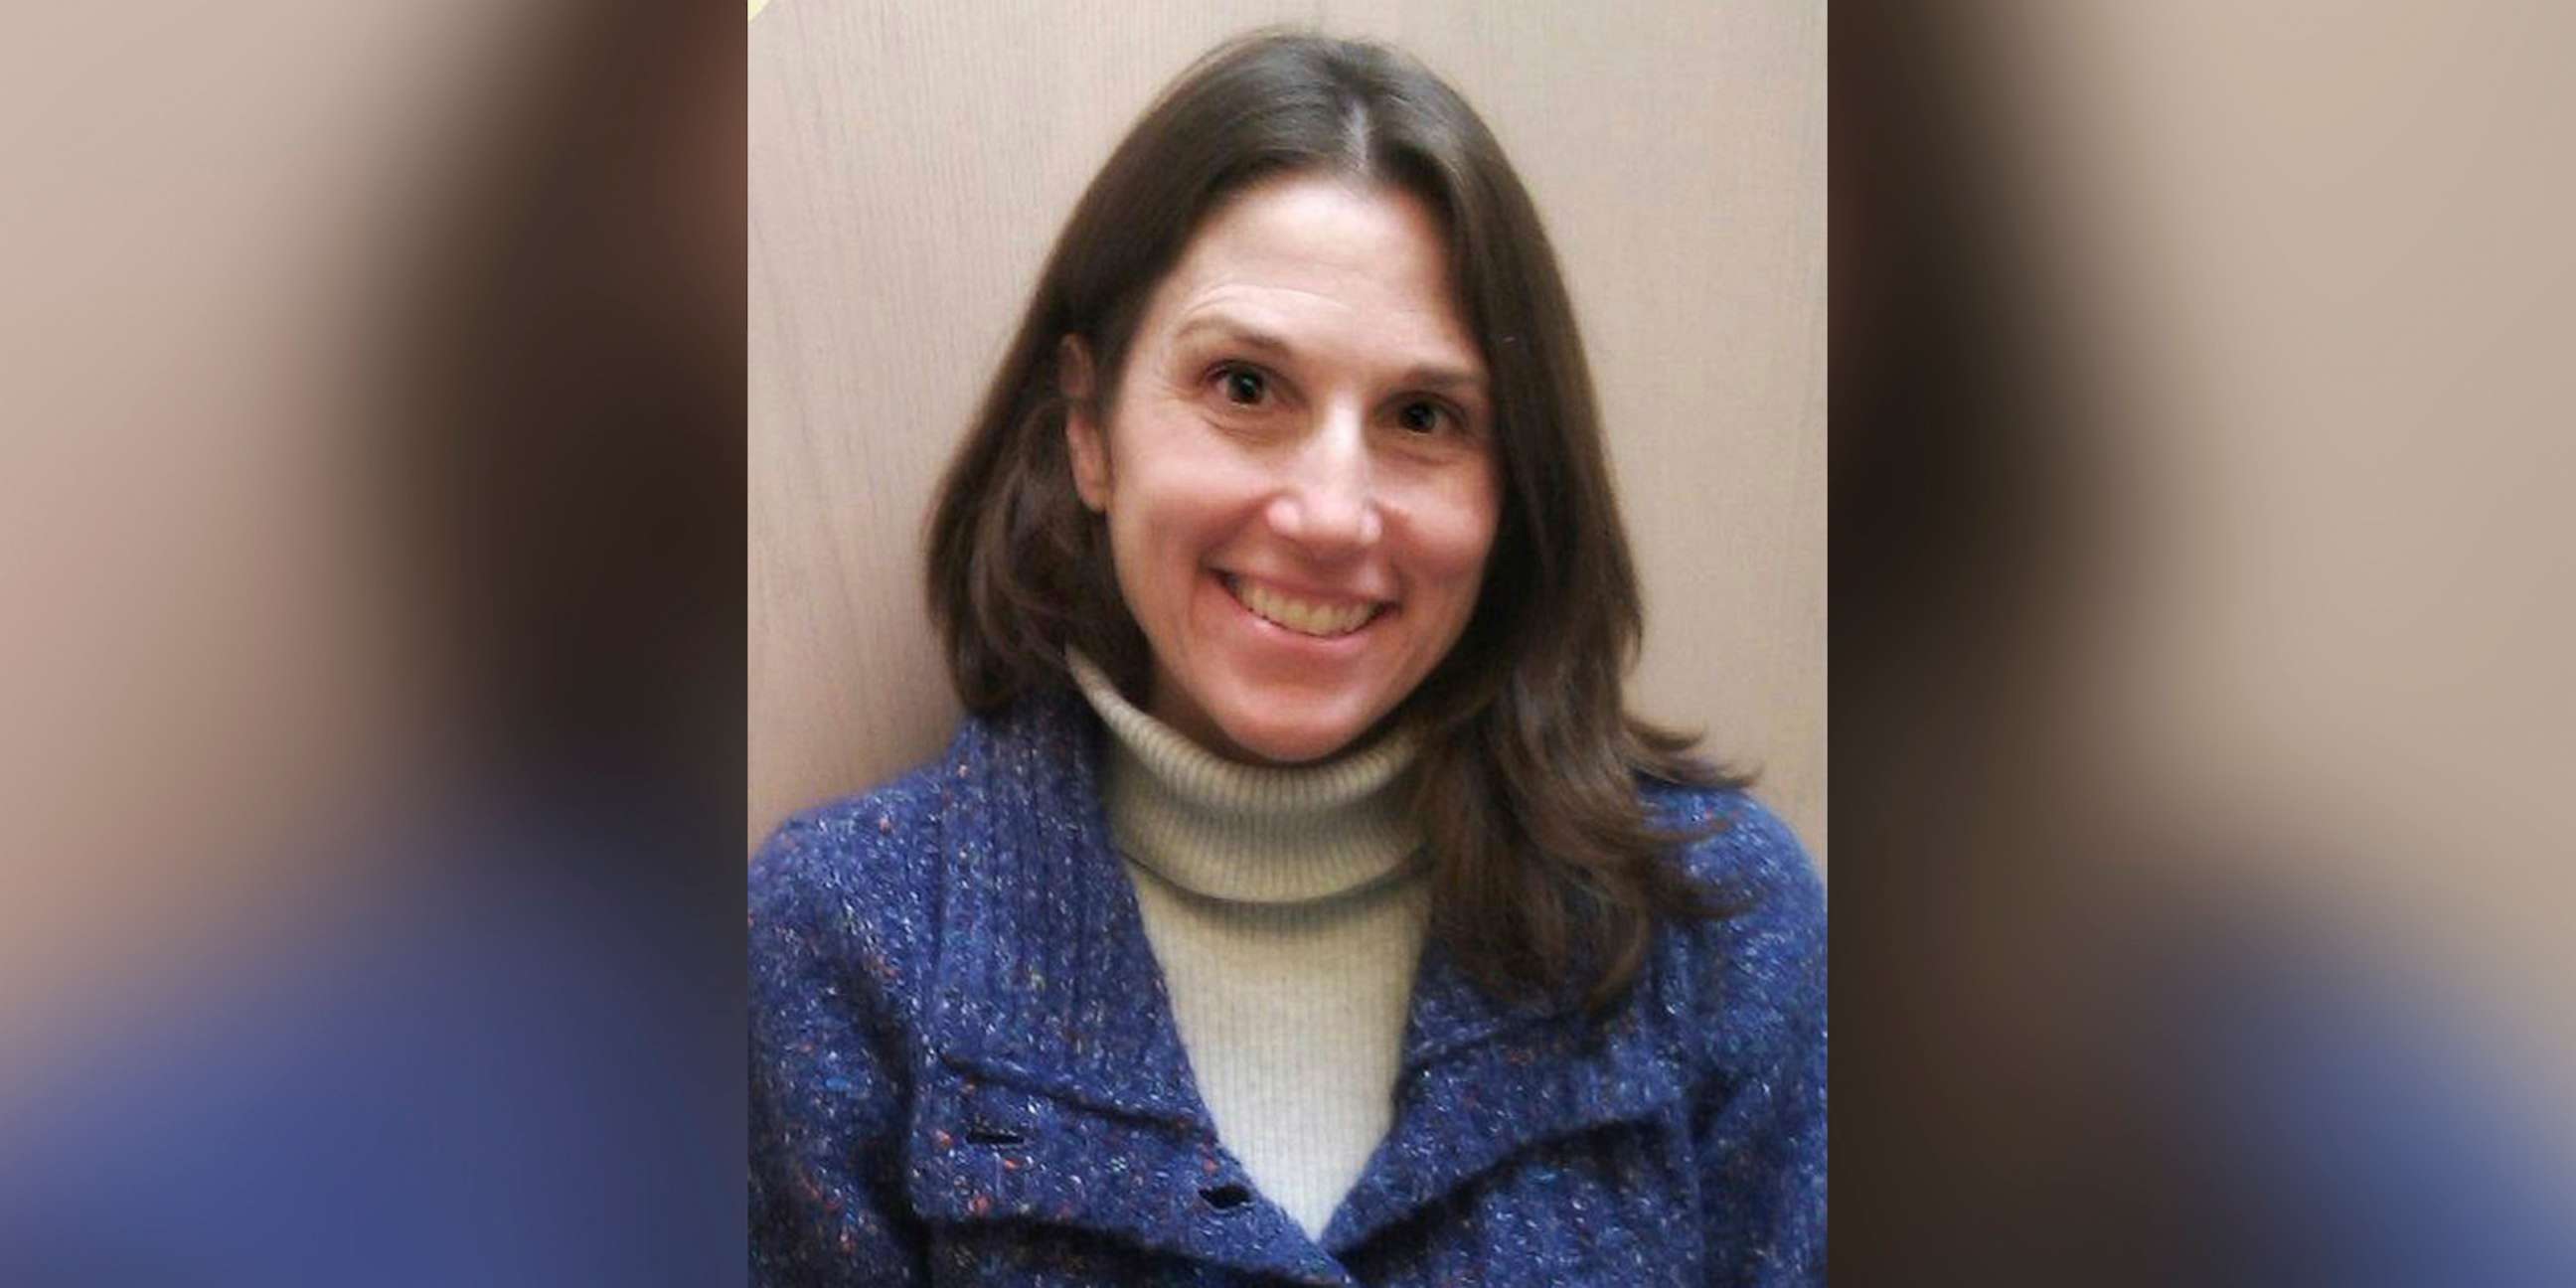 PHOTO: Deborah Ramirez is pictured in a 2011 photo released by Safehouse Progressive Alliance for Nonviolence. Ramirez alleges that Supreme Court Justice nominee Brett Kavanaugh exposed himself to her during his first year at Yale University.